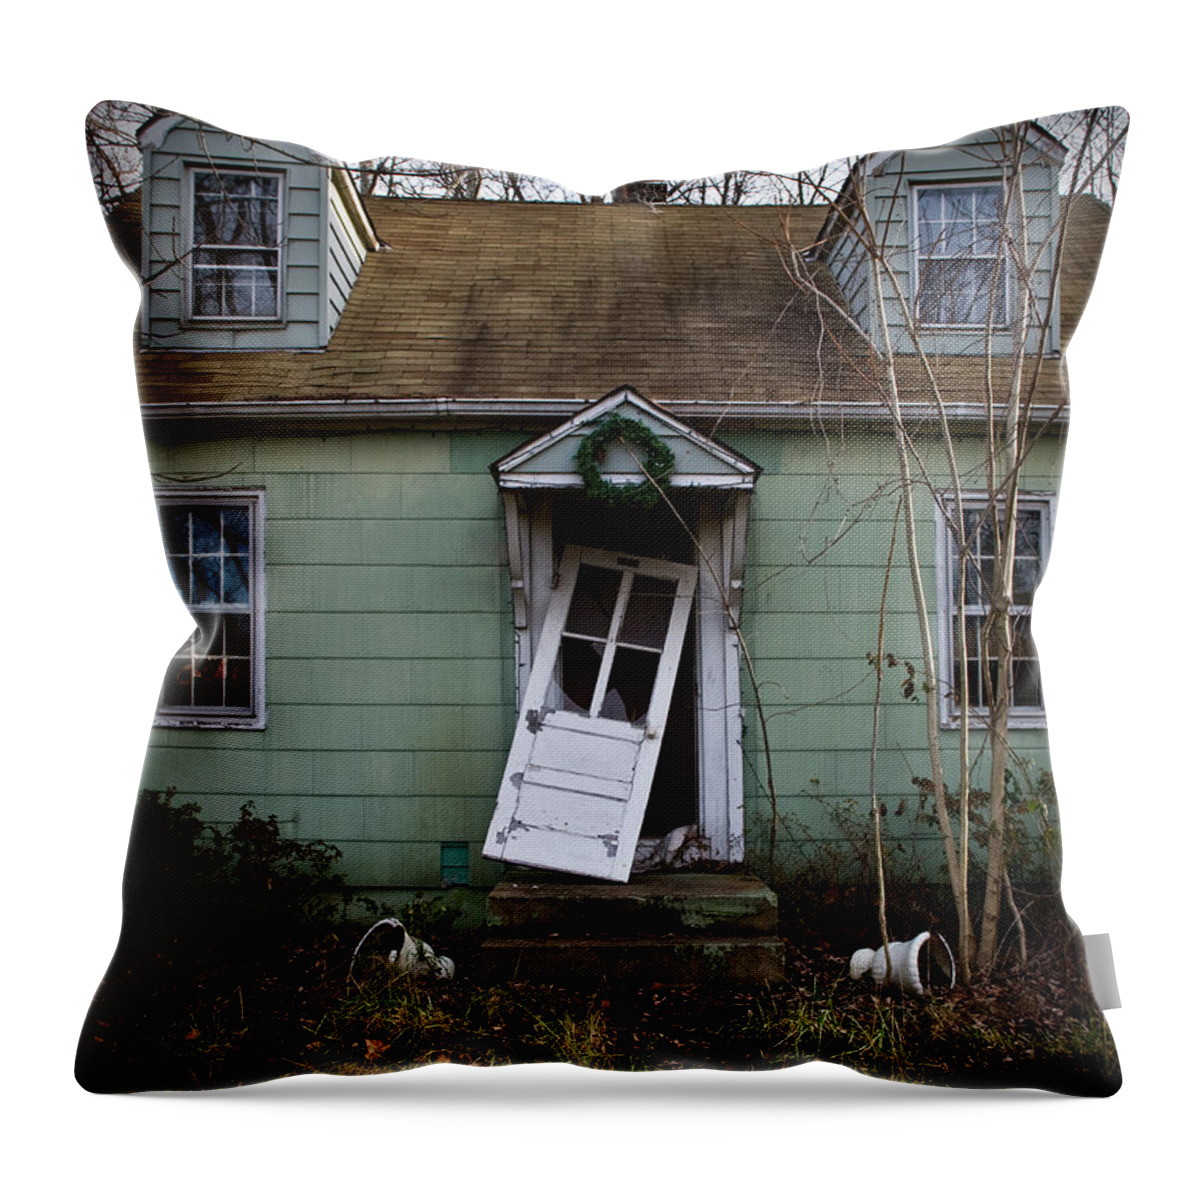 Derelict Throw Pillow featuring the photograph Welcome Home by Murray Bloom